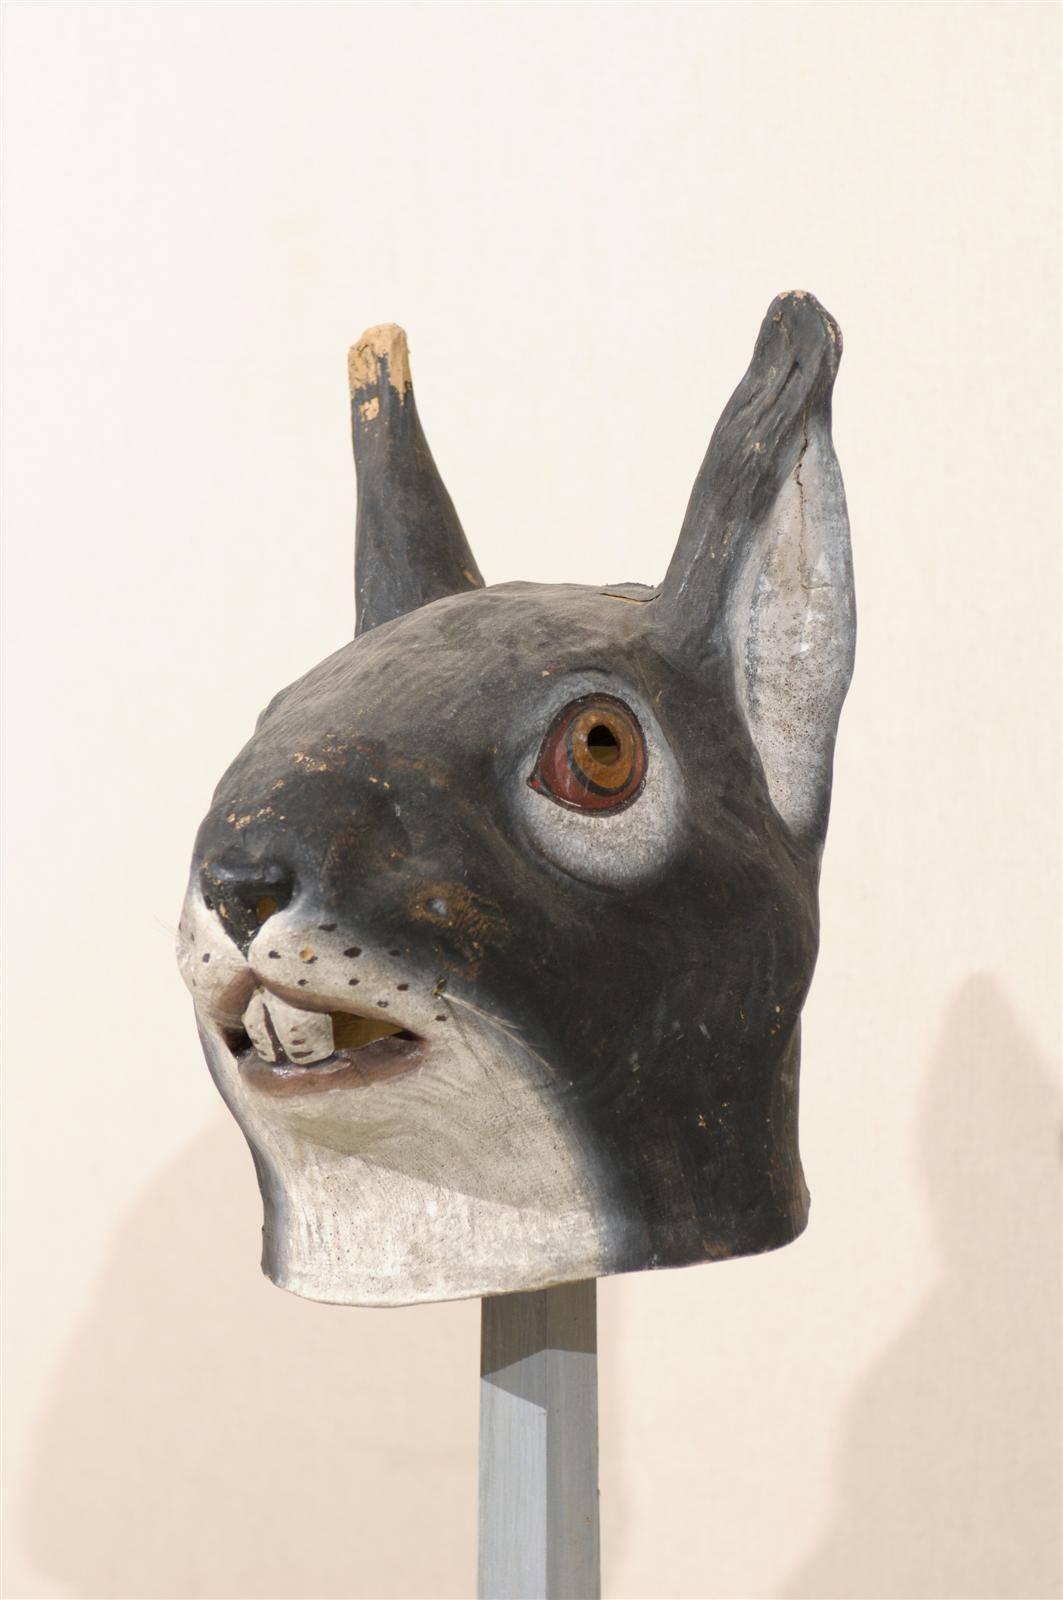 A collection of European Folk Art animal masks on custom stands. These Folk Art papier-mâché animal masks are from the early 20th century. The measurements below are for the rabbit mask.